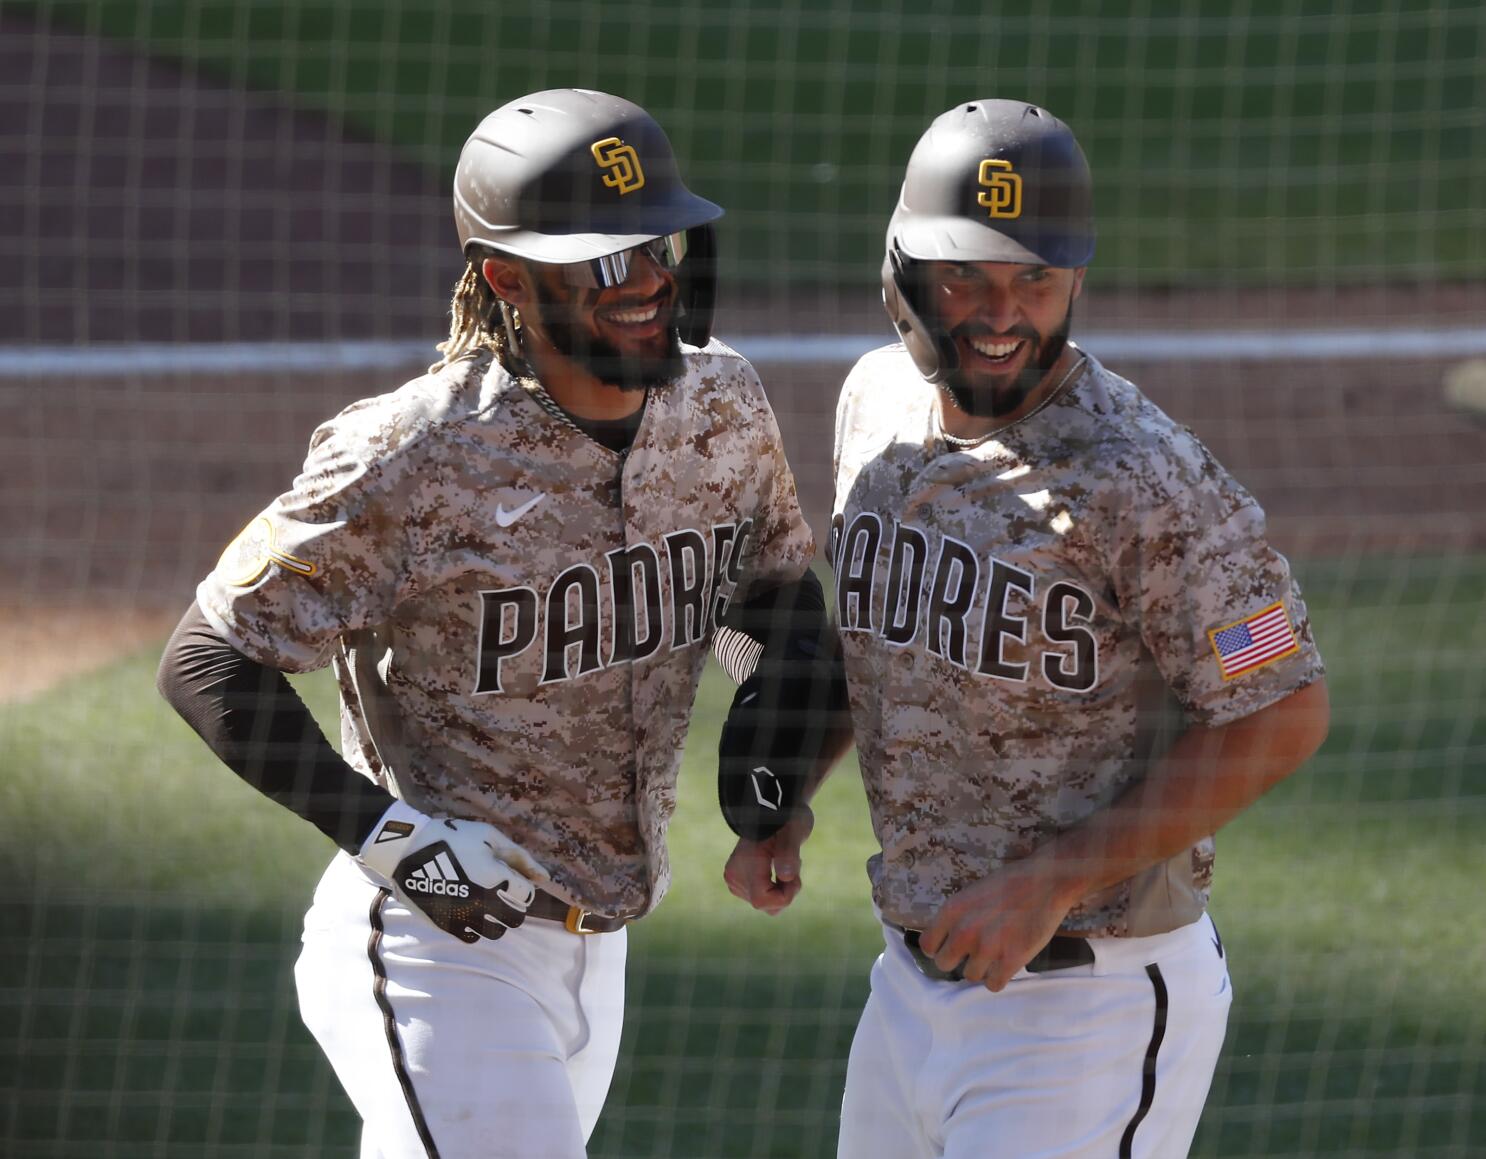 Did the Padres make special road jerseys for the All-Star Game because they  designed the wrong jersey?